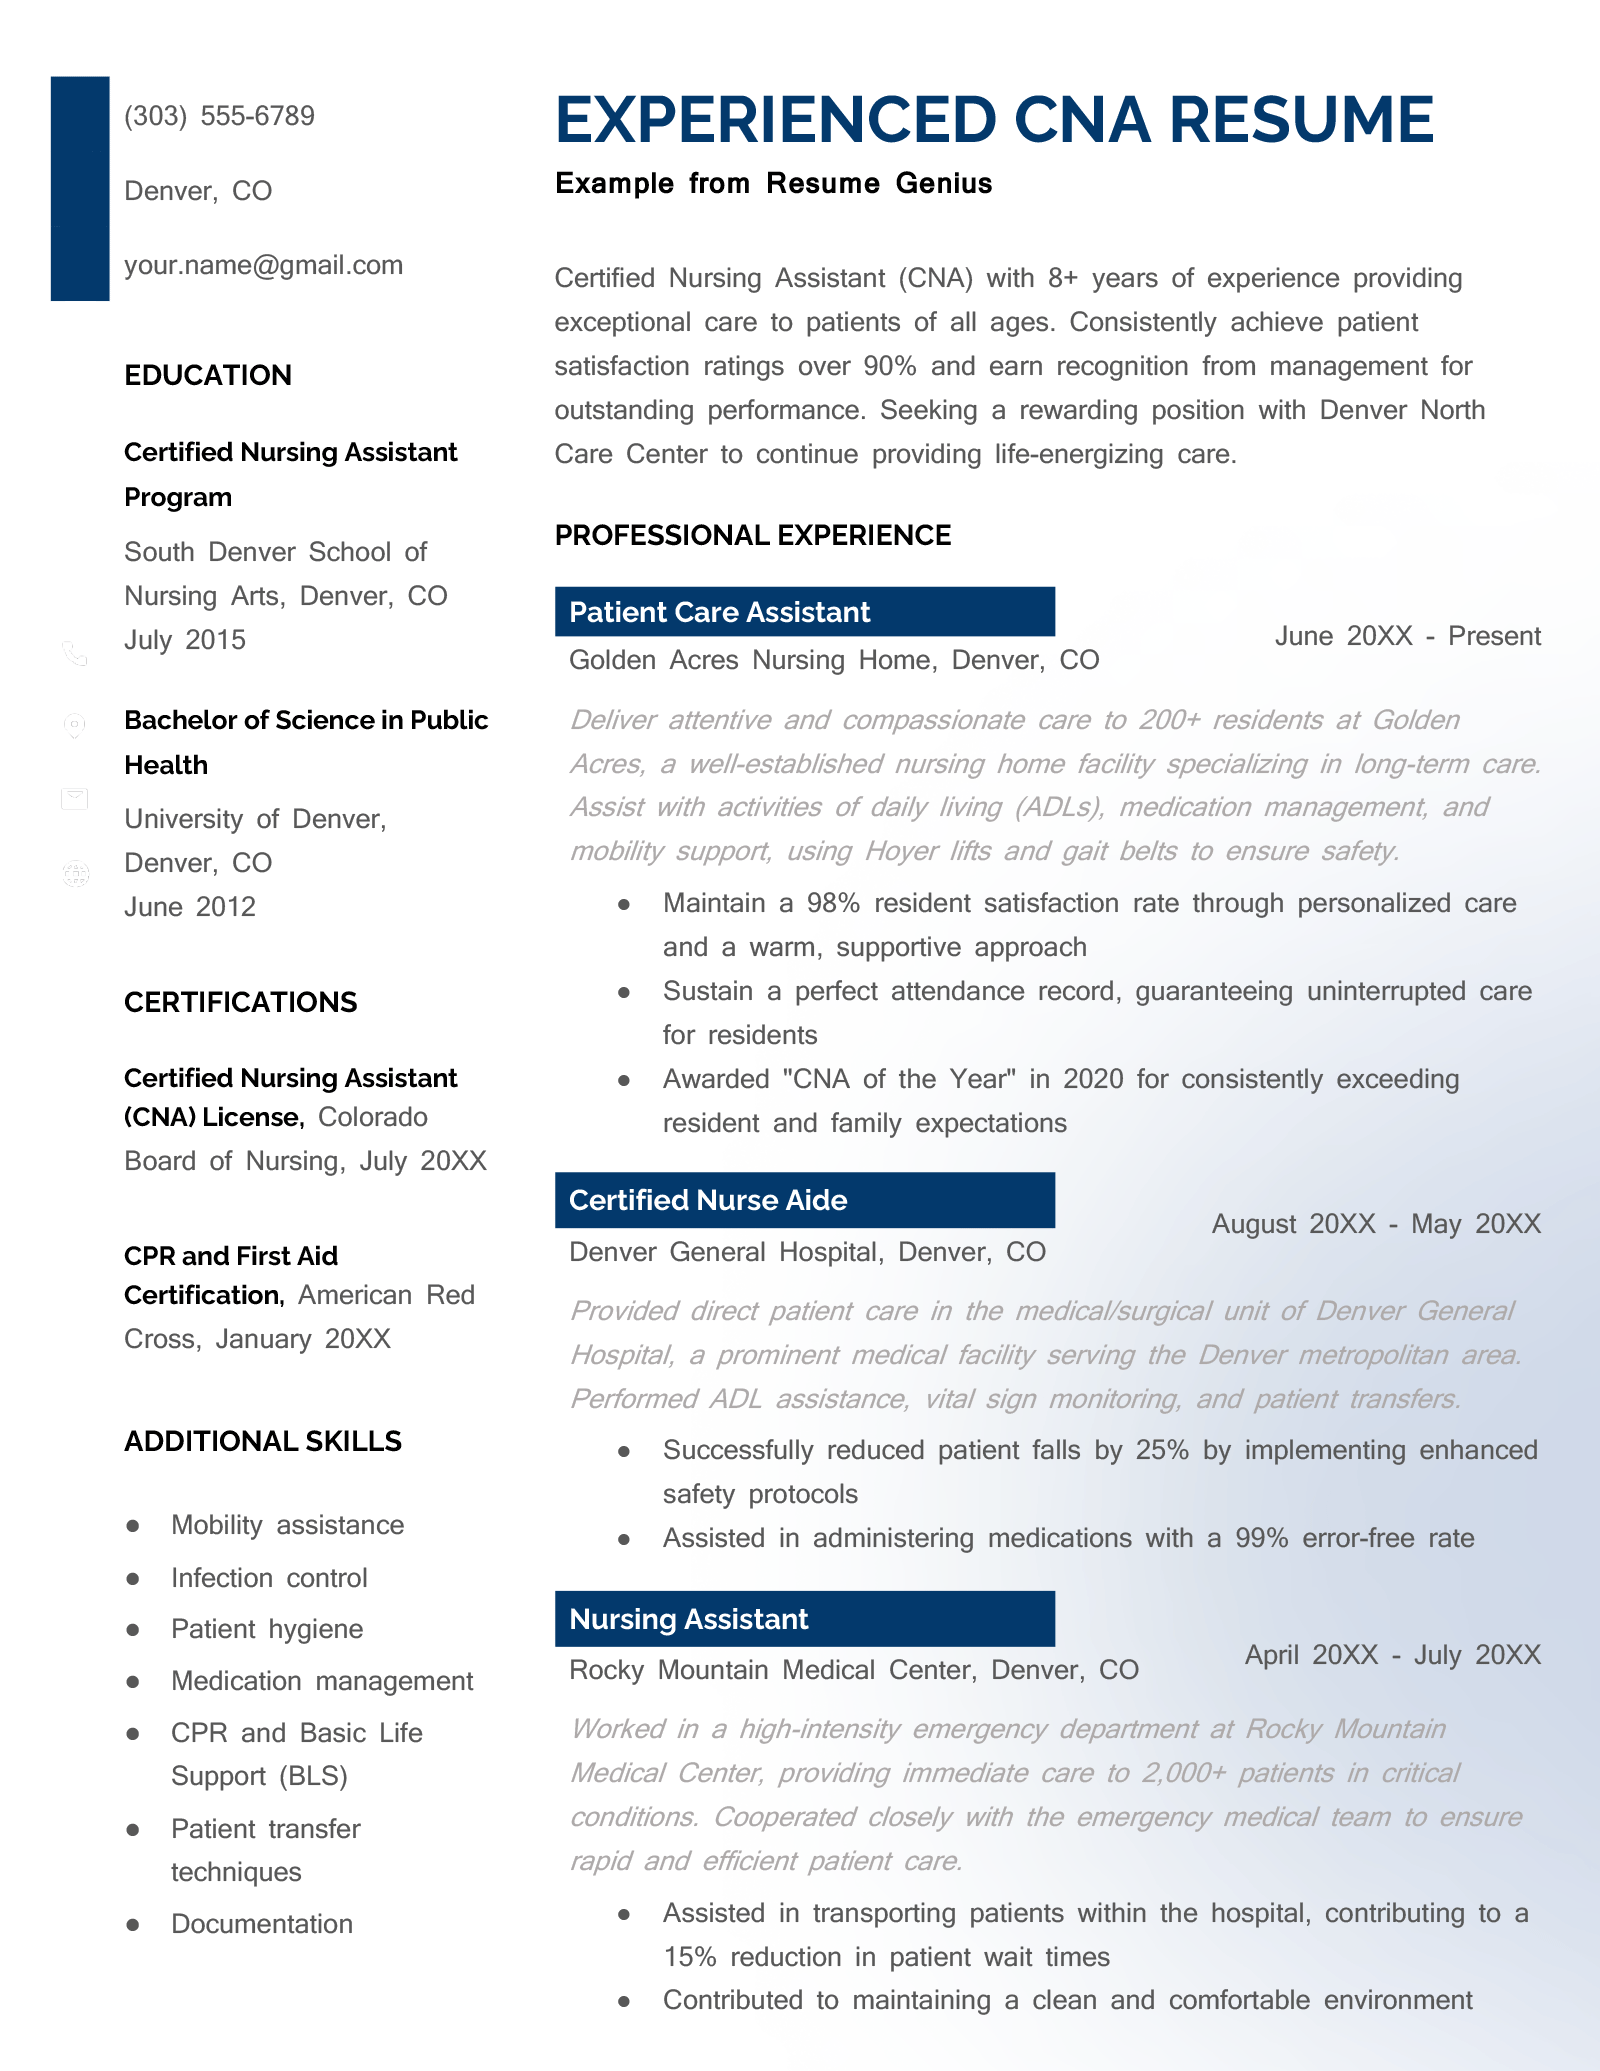 Example of a resume for an experienced CNA with 8 years of experience that highlights their professional experience. The design uses two-columns with navy blue headings and a light blue gradient in the background.